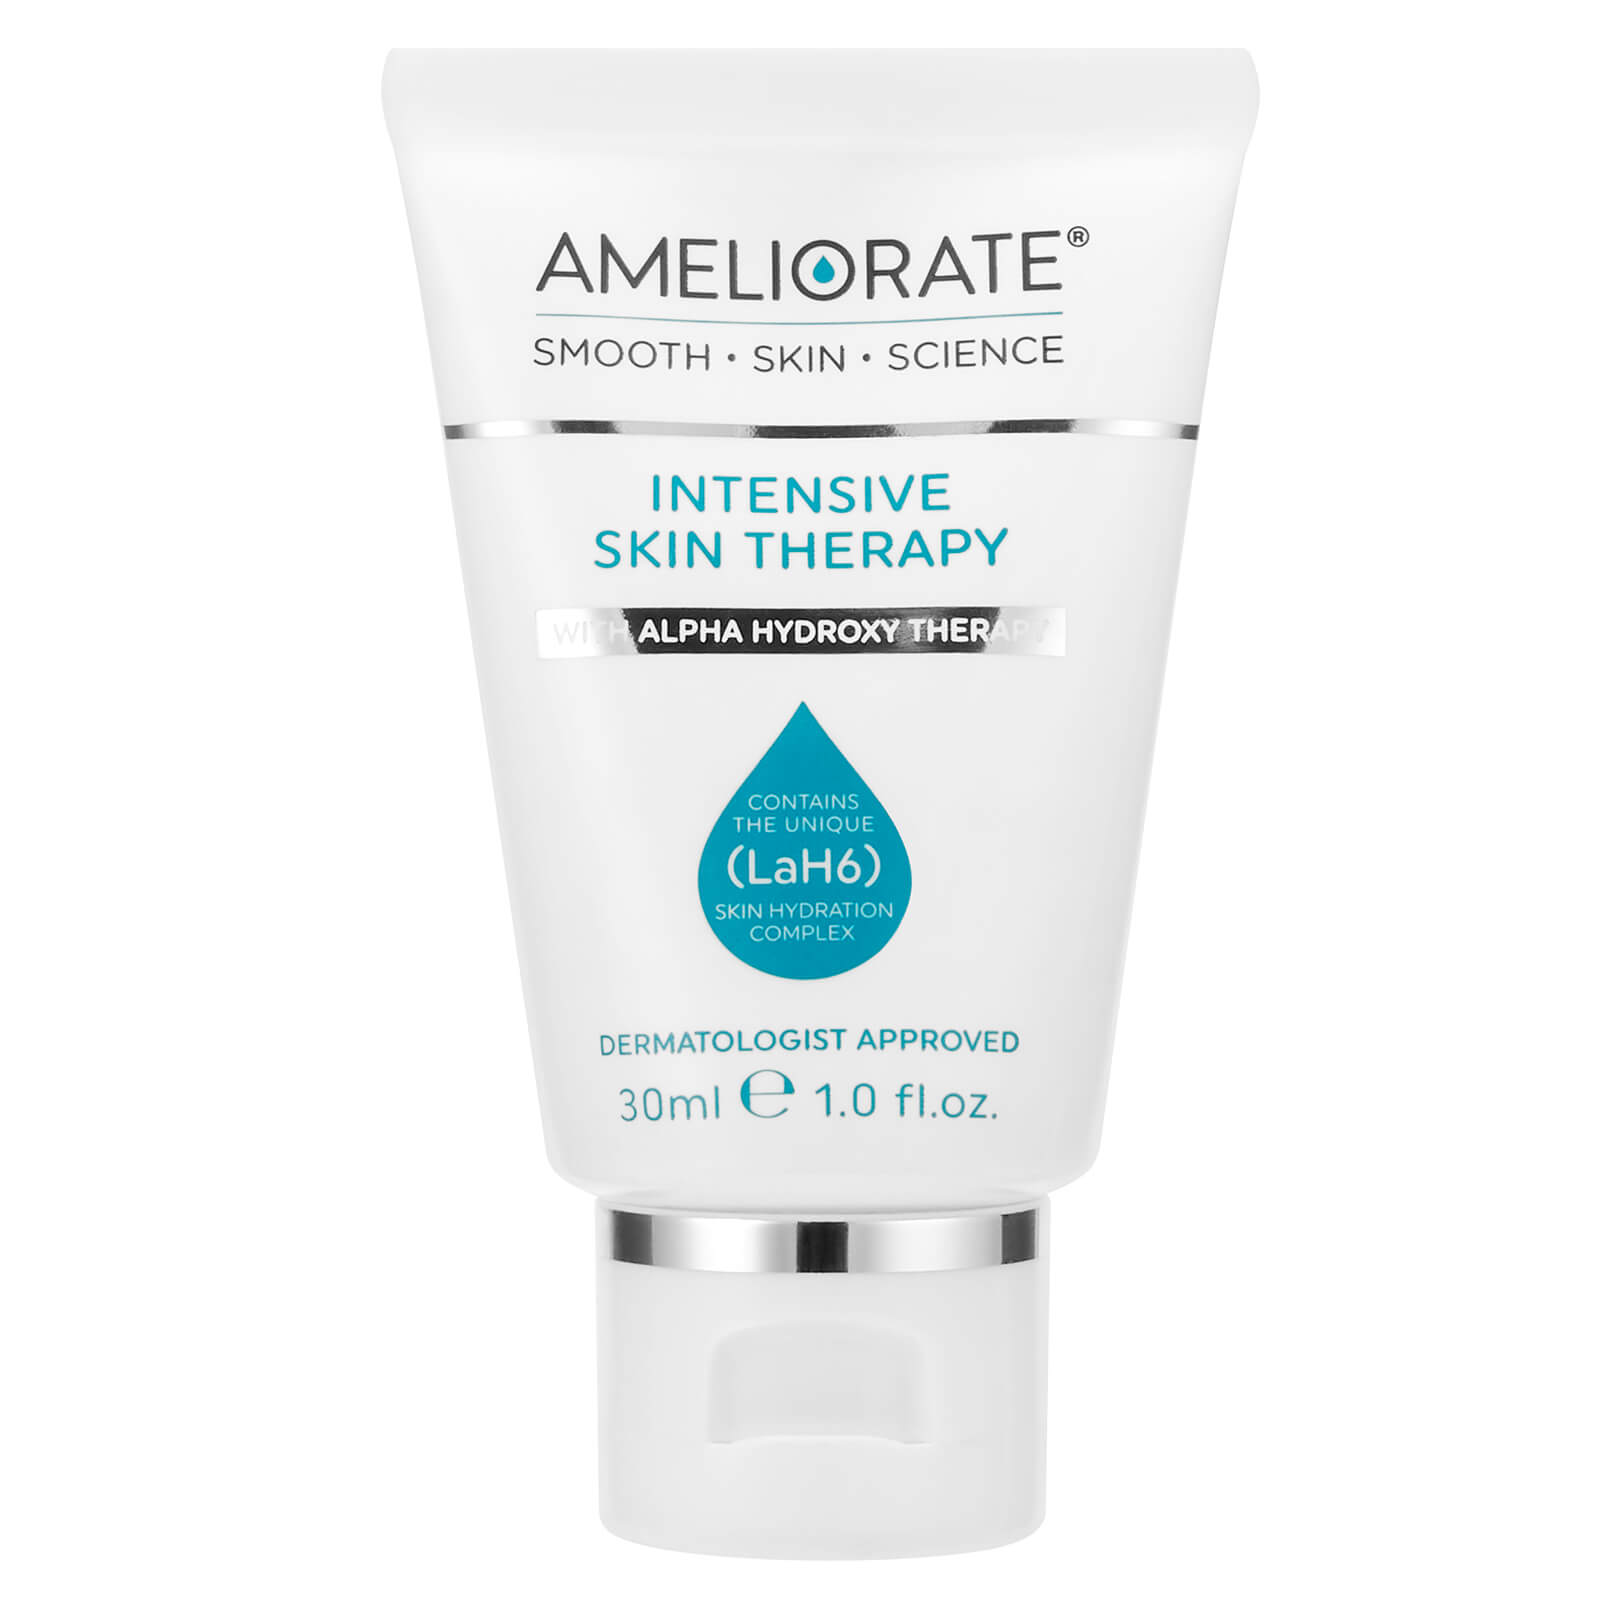 AMELIORATE INTENSIVE SKIN THERAPY 30ML